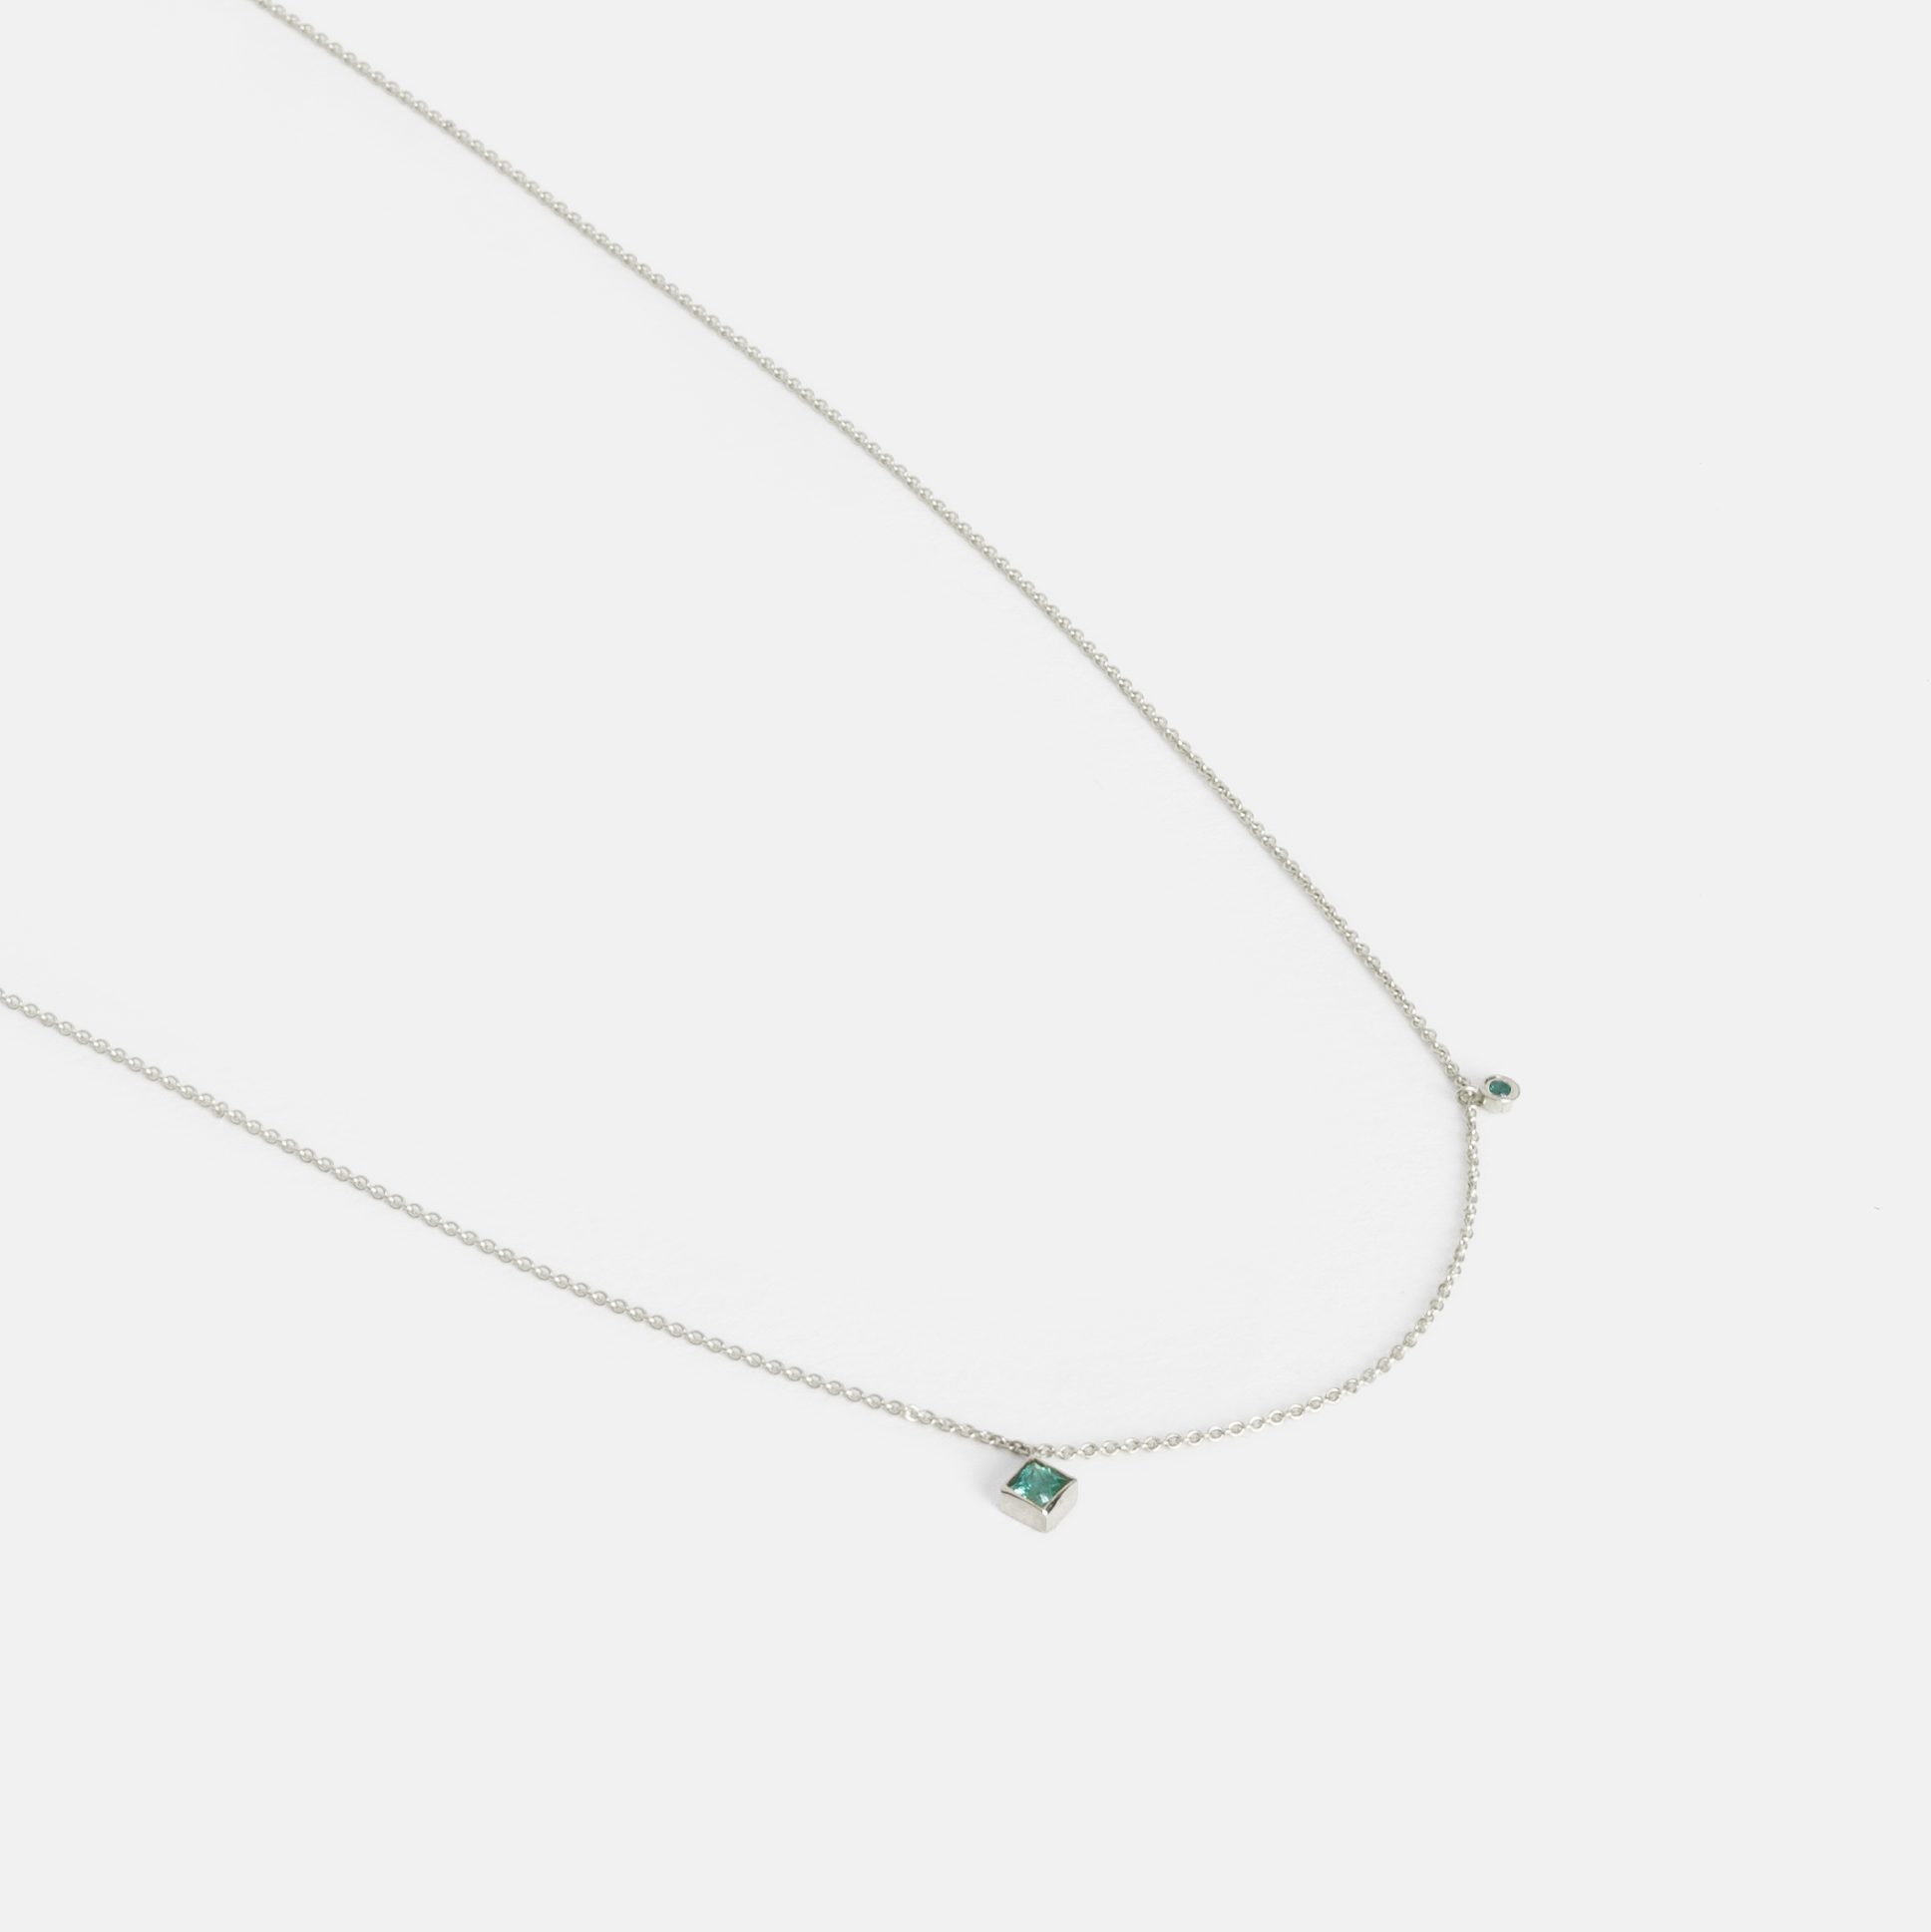  Ibi Thin Necklace in 14k White Gold set with Emeralds By SHW Fine Jewelry NYC